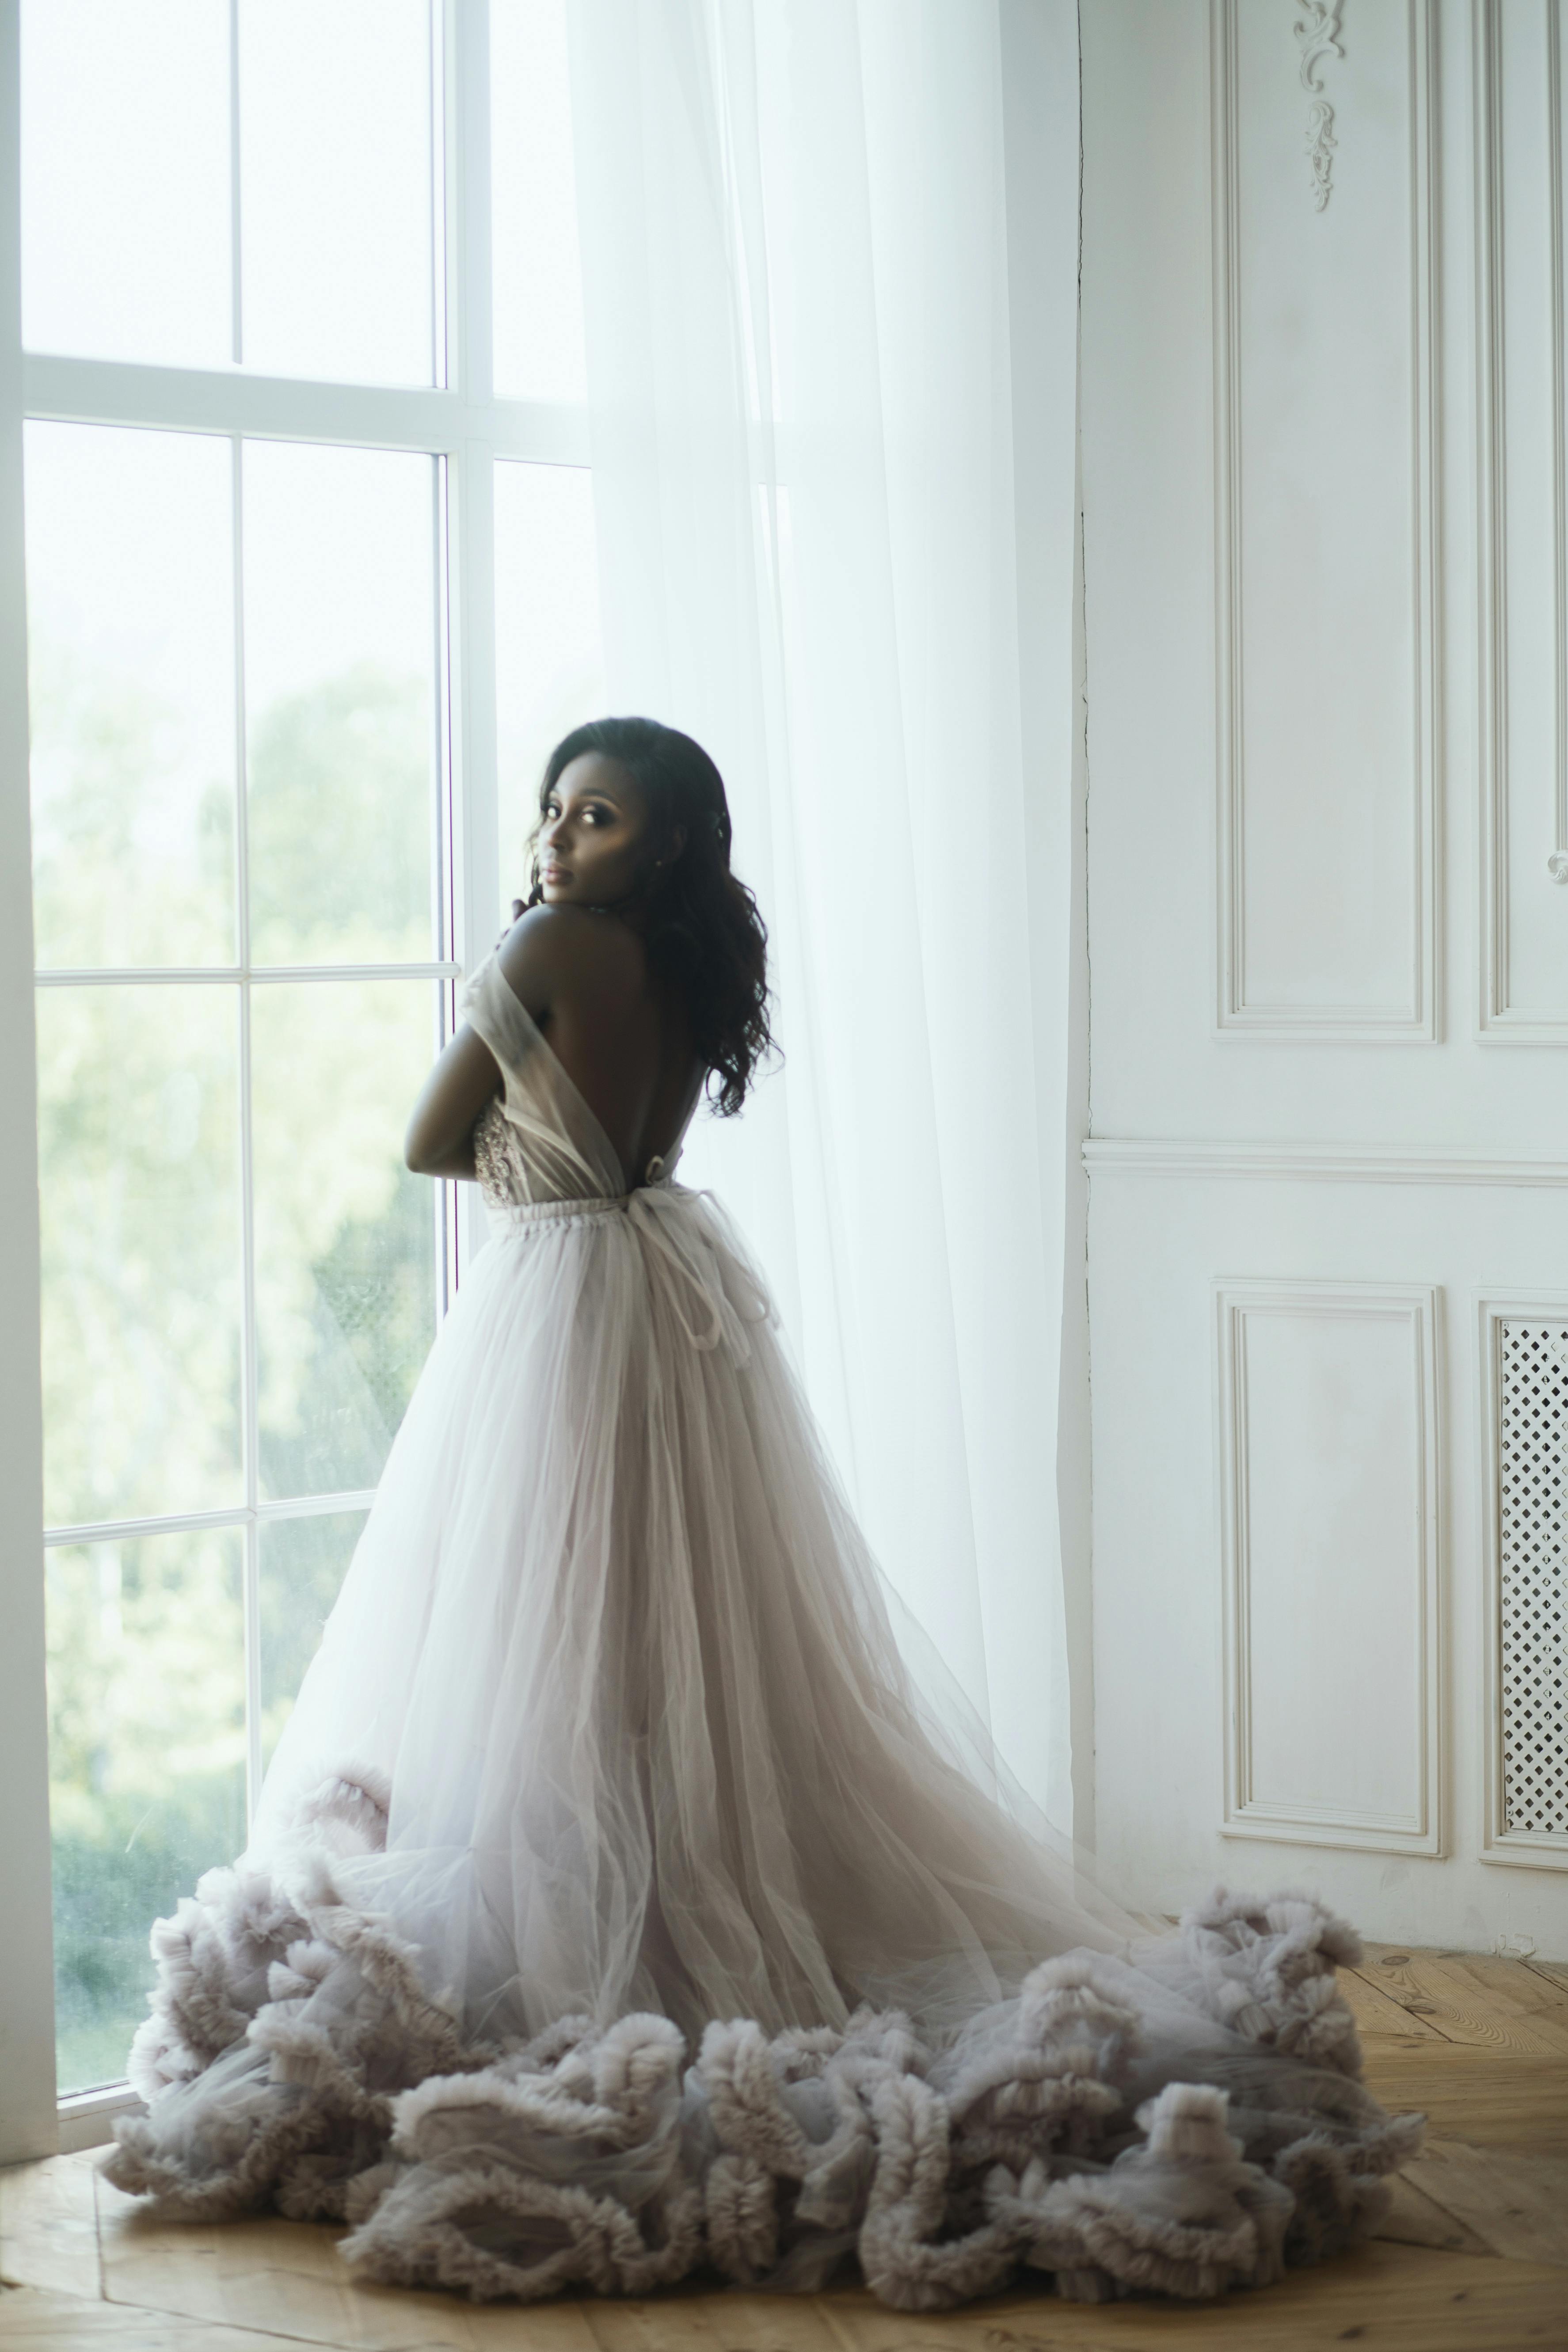 For illustration purposes only. Woman standing at a window in a wedding dress looks at the camera | Source: Pexels